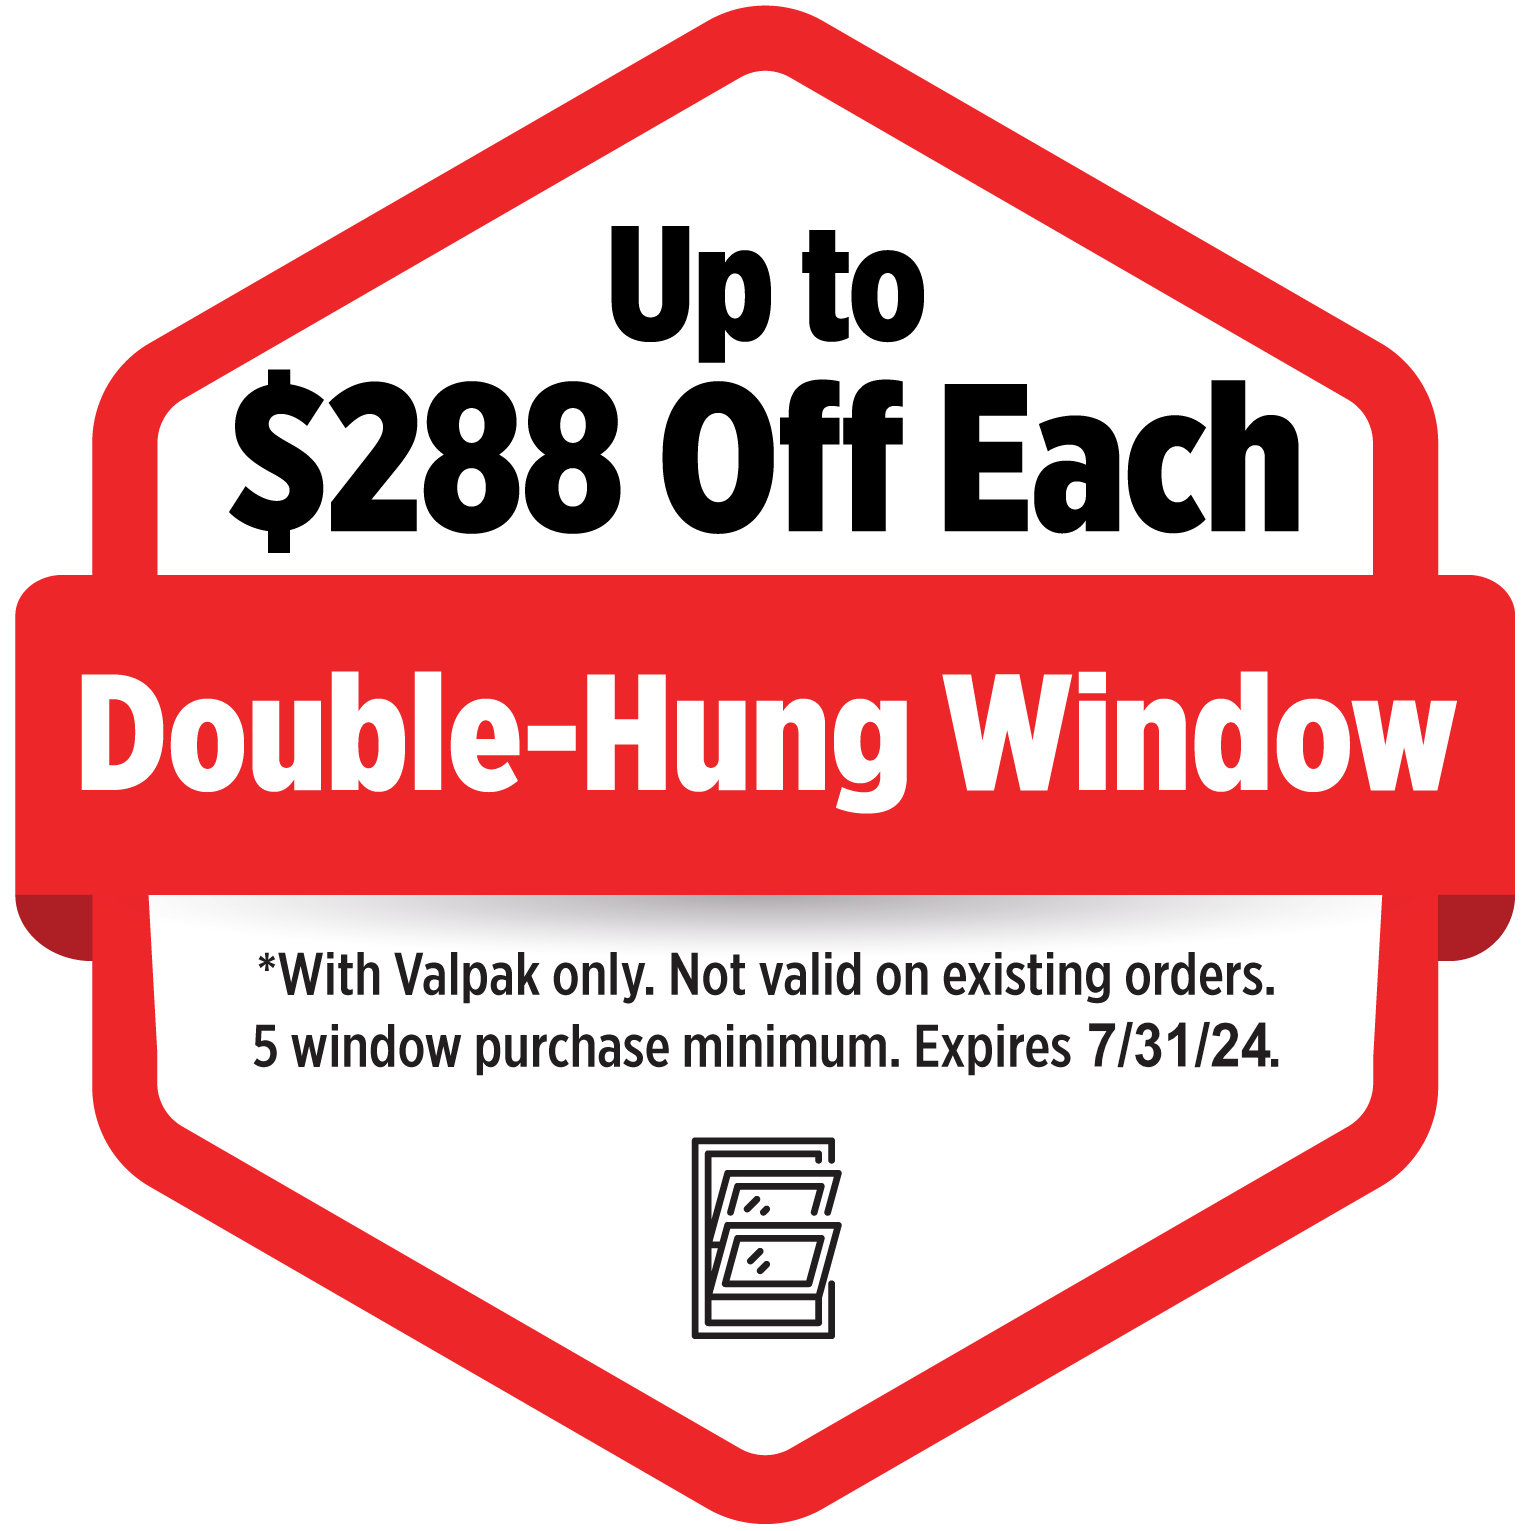 Promotion offering up to $288 off each double-hung window with a minimum purchase of five windows. Valid with Valpak only, not applicable to existing orders. Expires on 7/31/24.